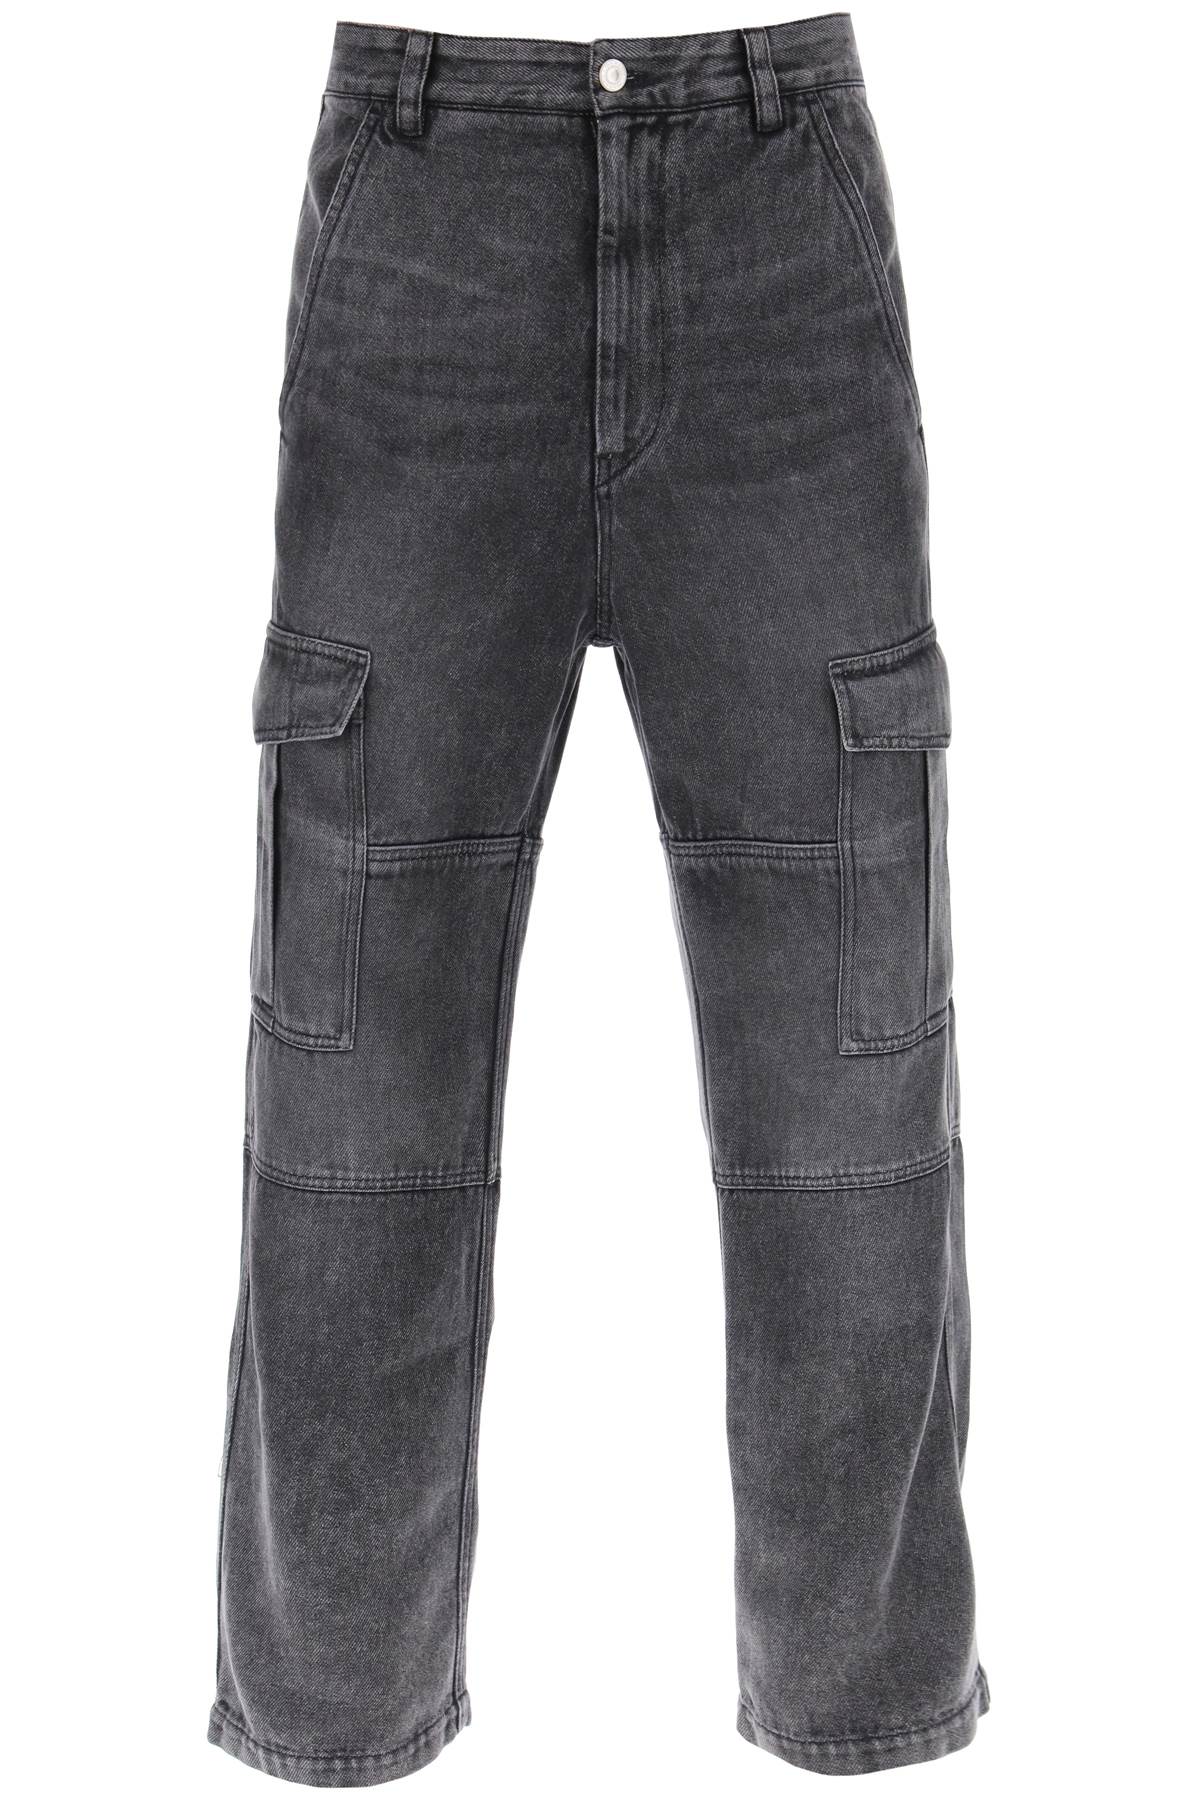 Marant terence cargo jeans-0